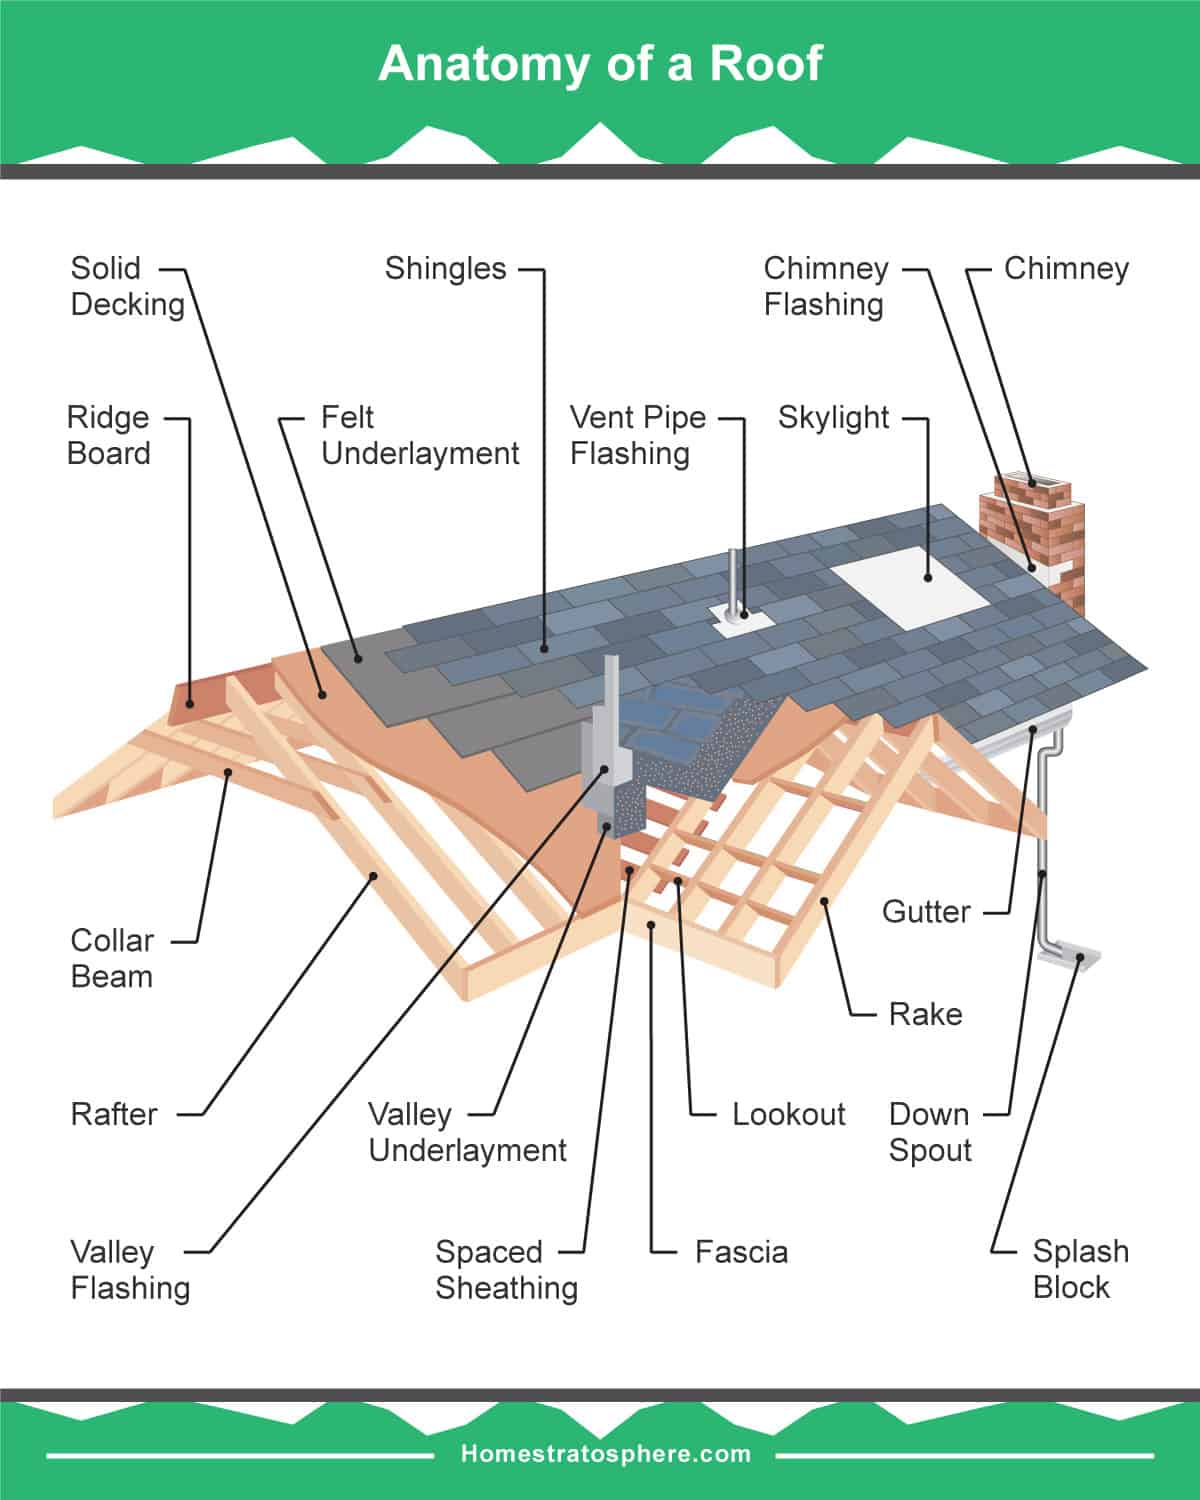 38_Anatomy-of-a-Roof